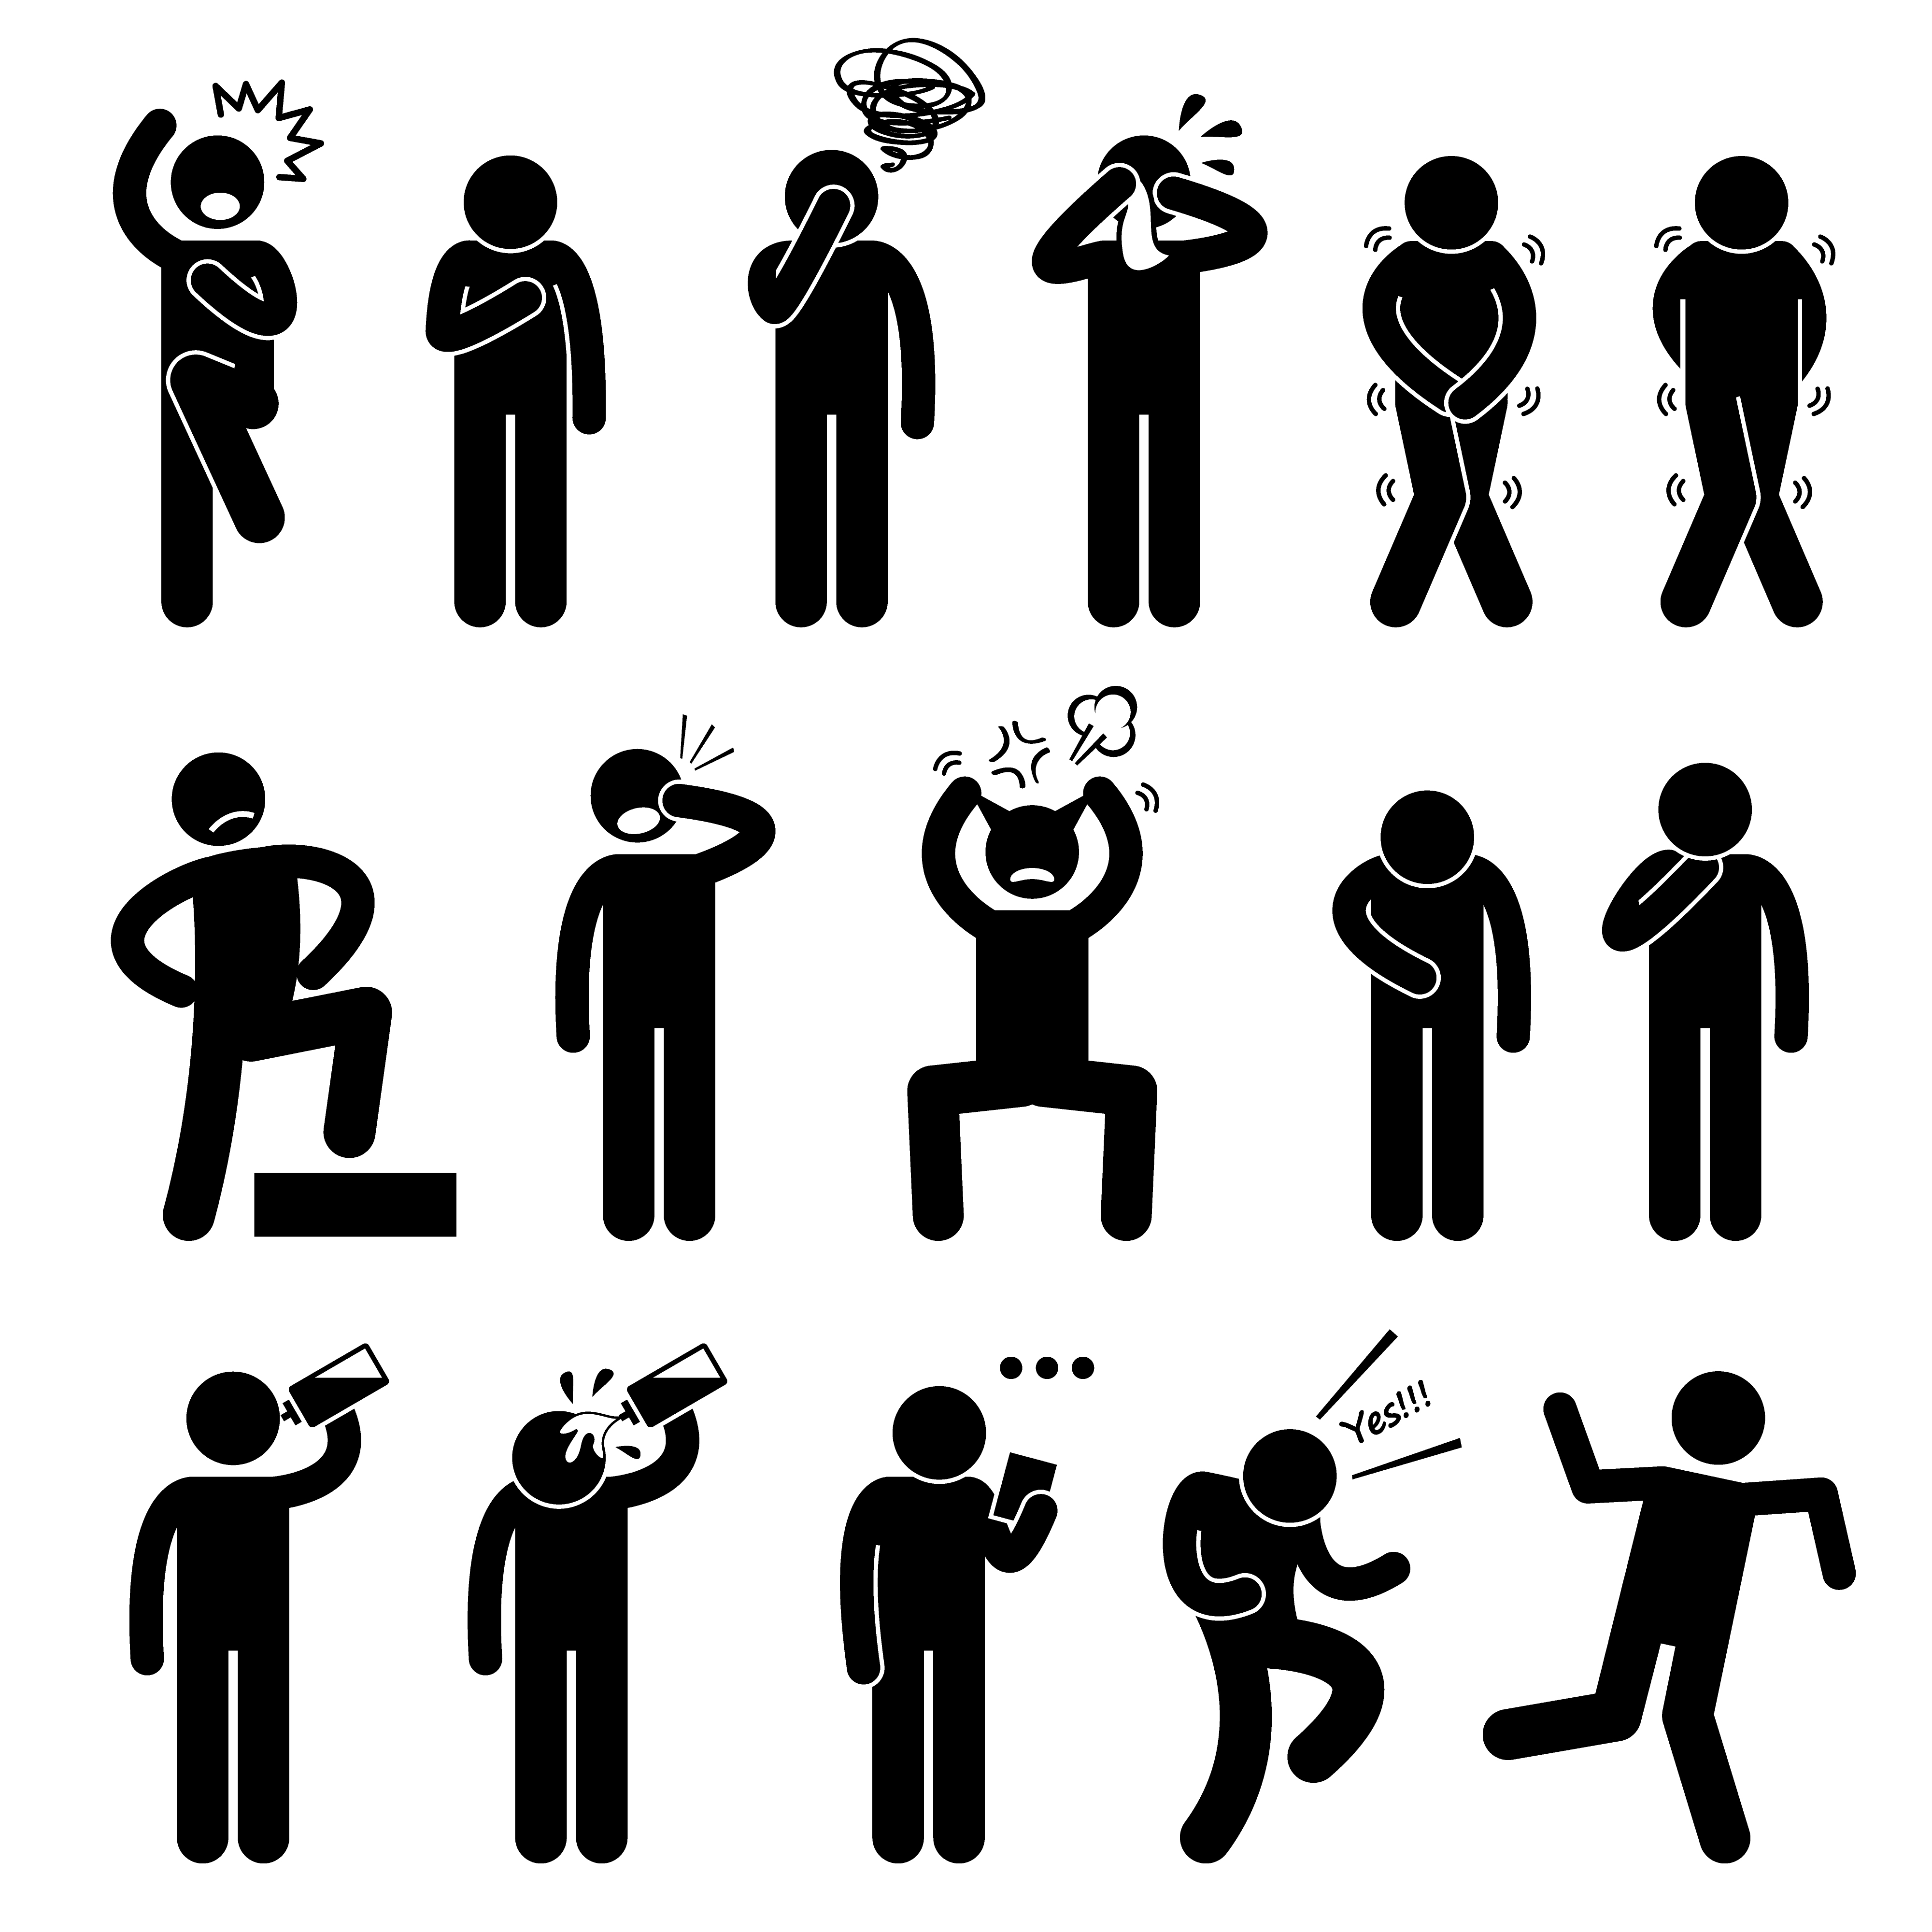 Human Action Poses Postures Stick Figure Icons. 349495 Vector Art Vecteezy